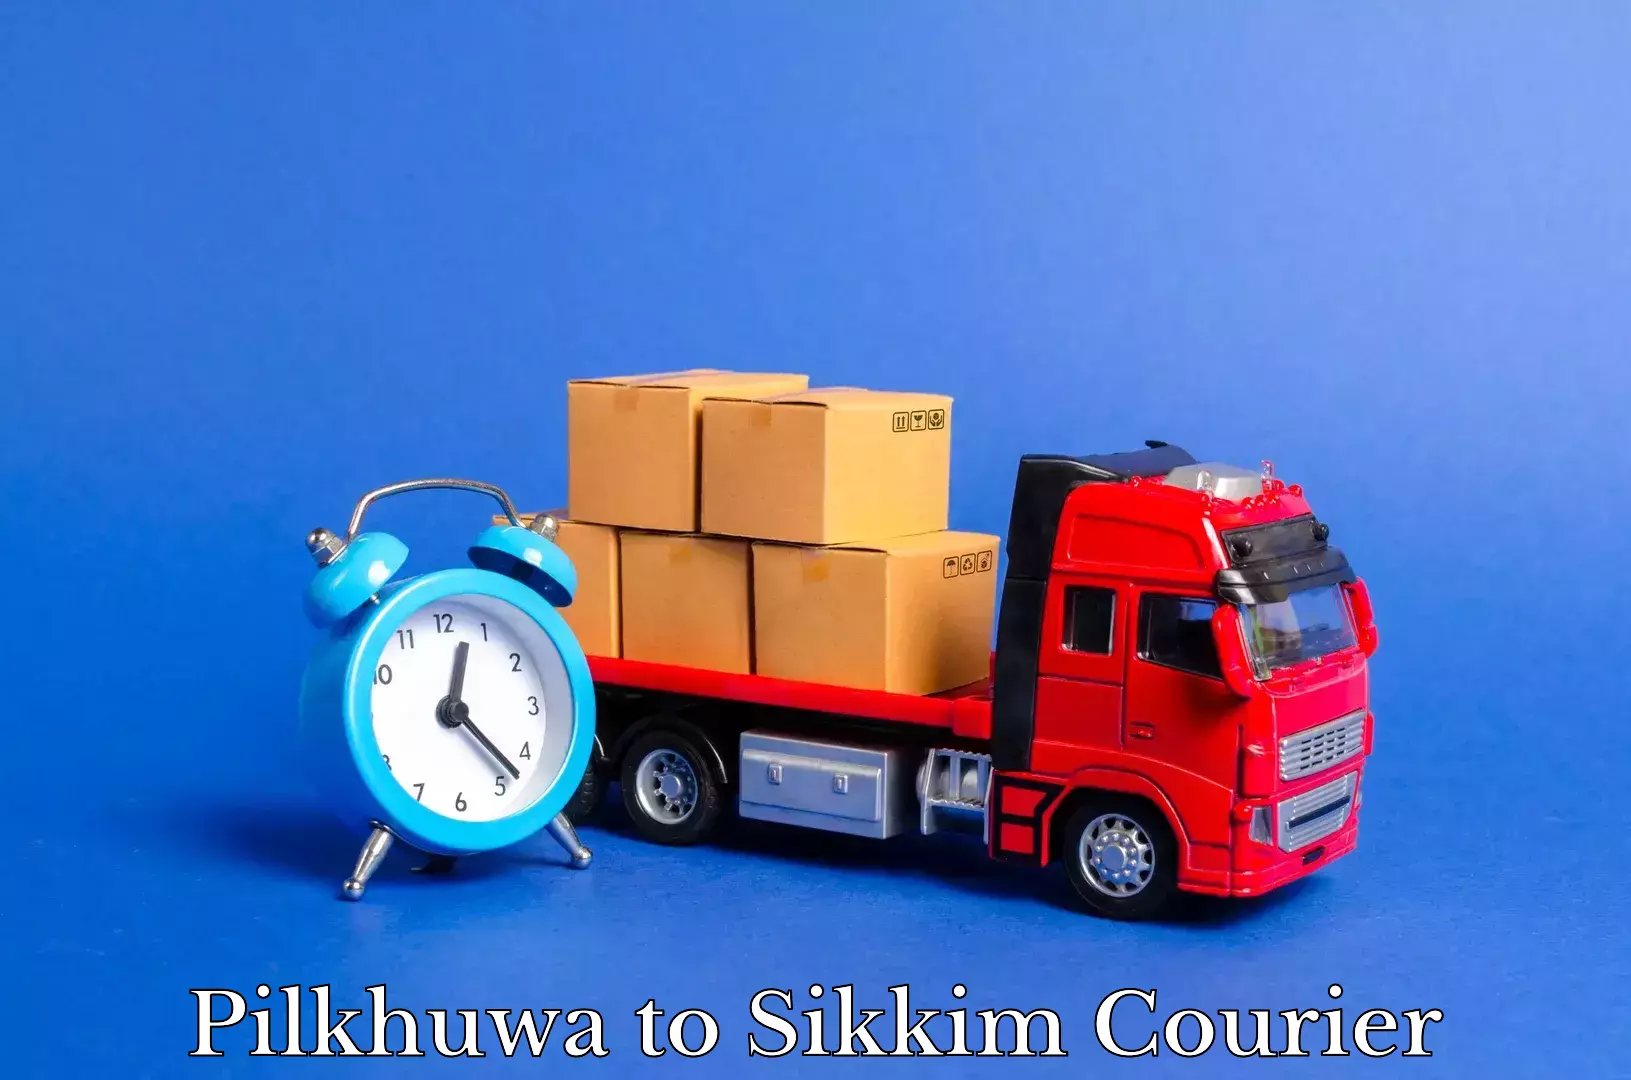 Furniture relocation services Pilkhuwa to Sikkim